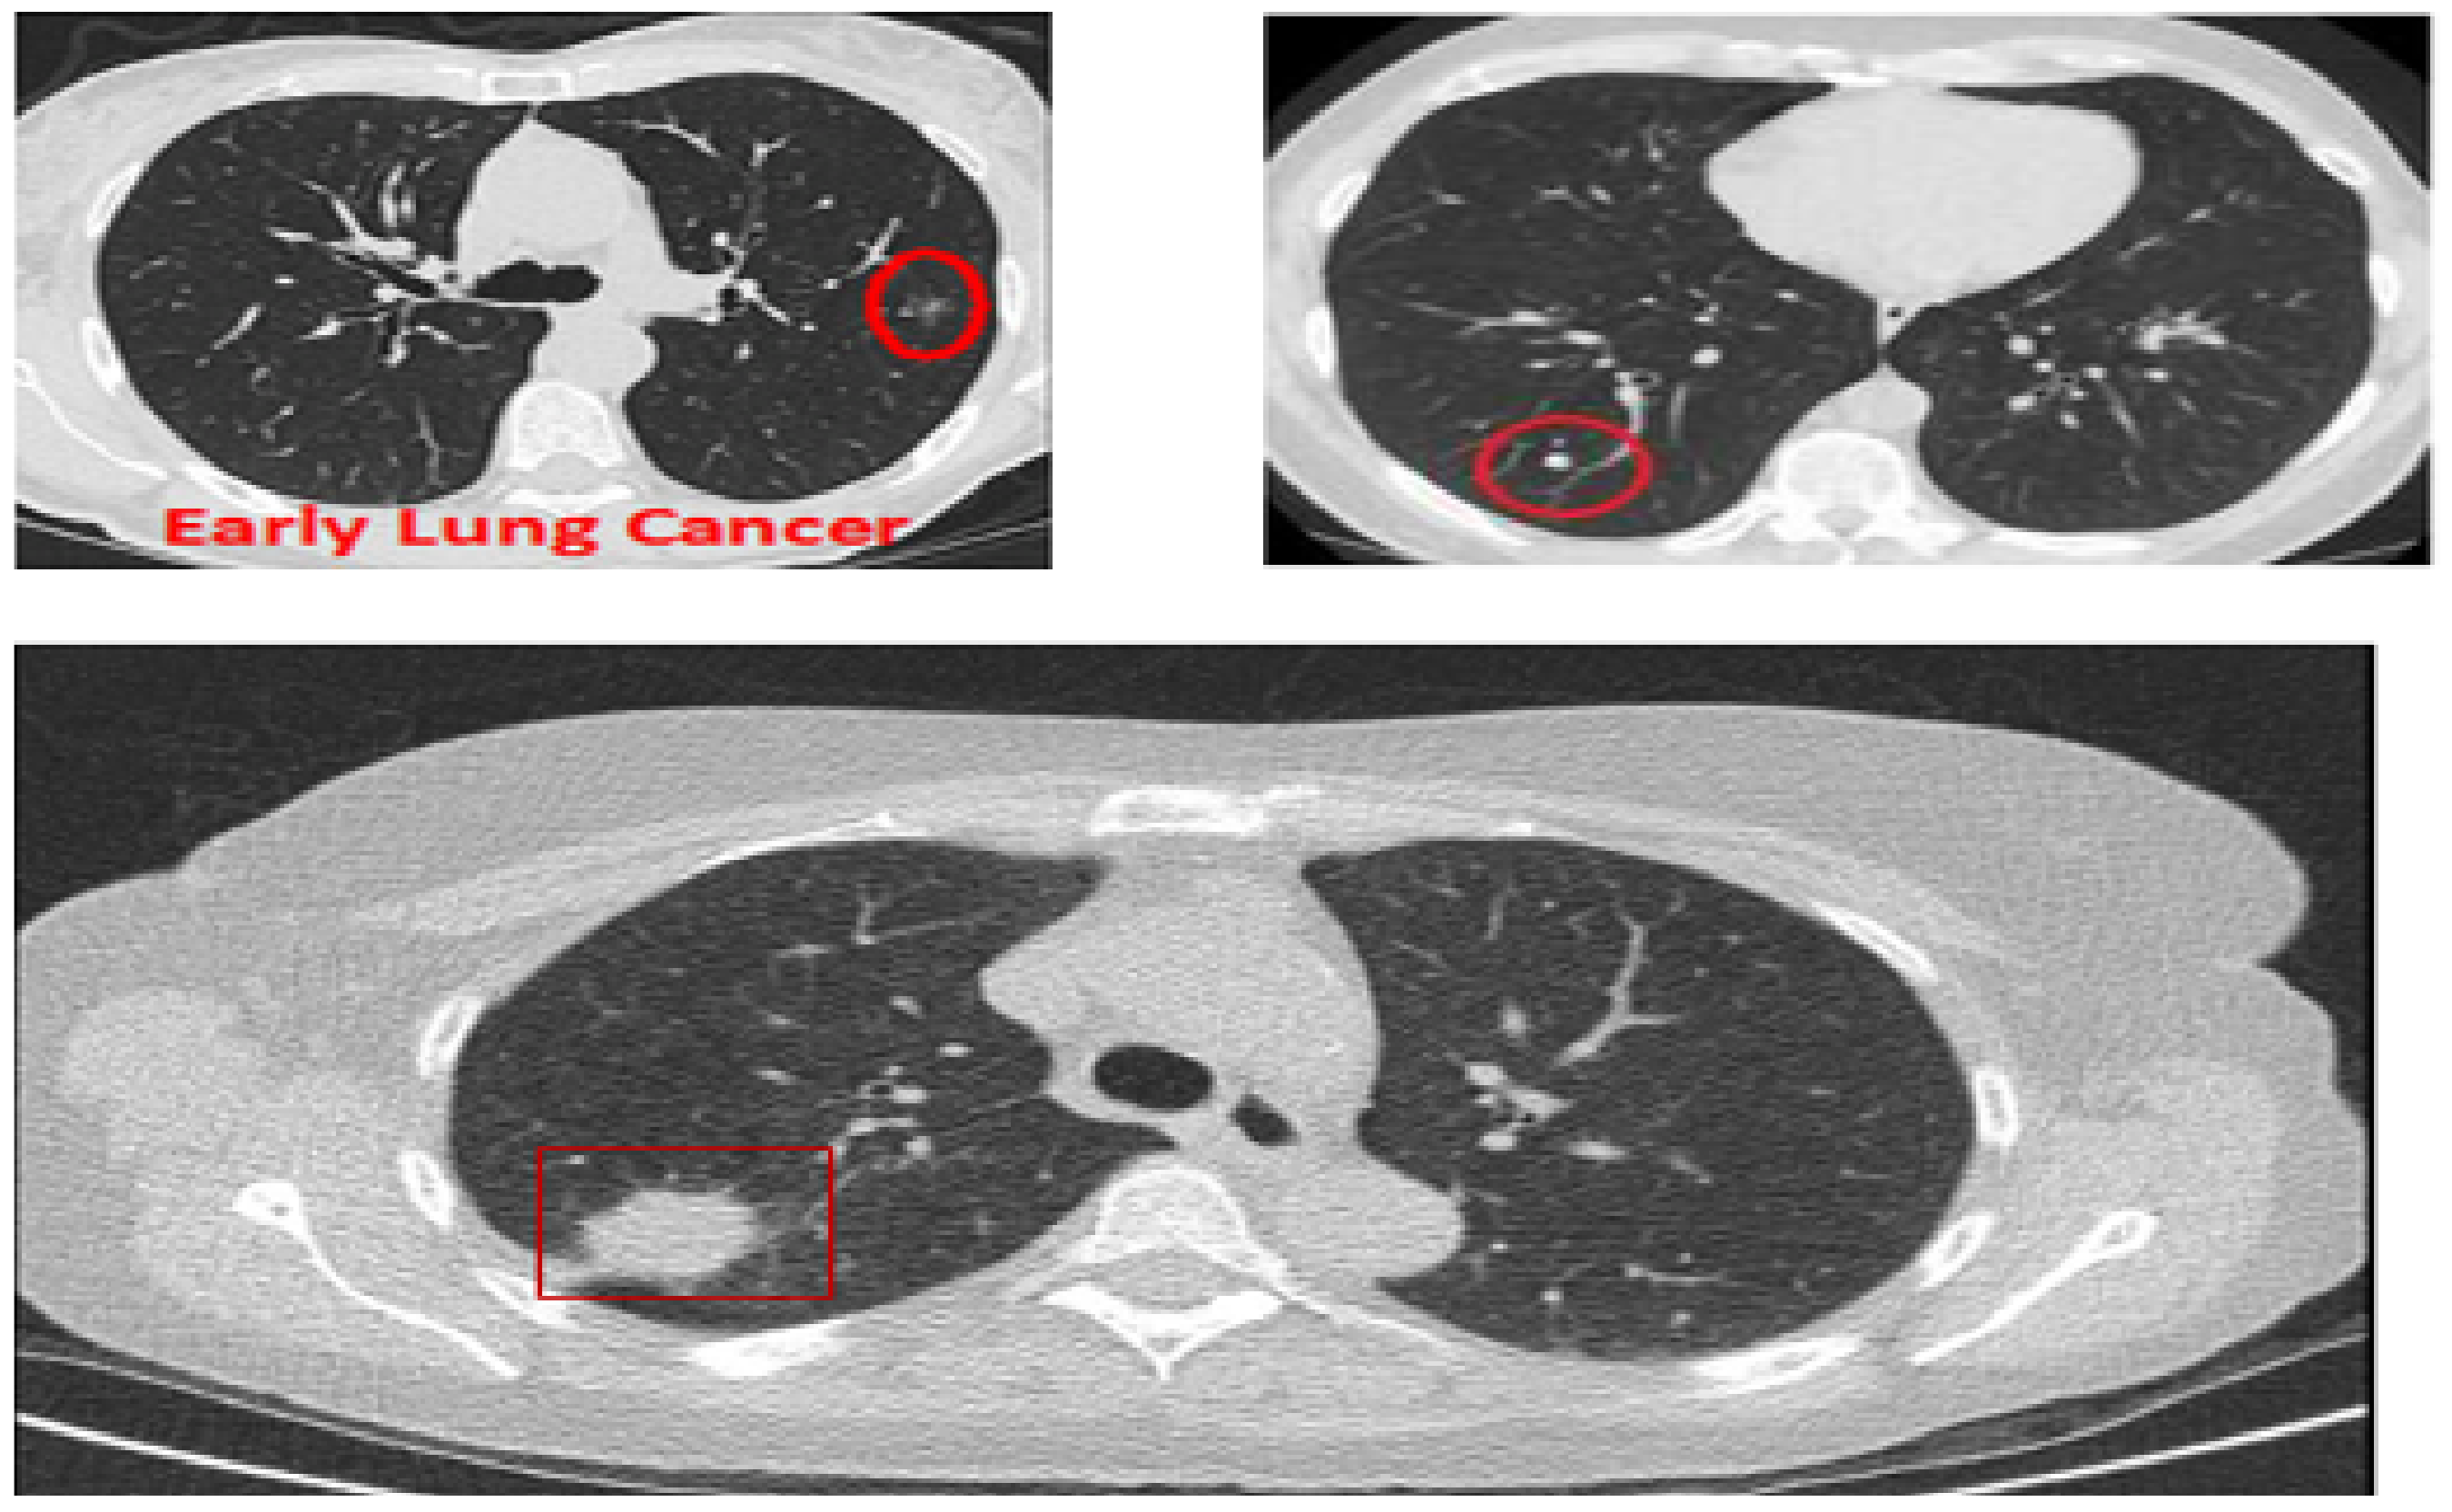 Cancers | Free Full-Text | Effective Method for Lung Cancer Diagnosis CT Using Deep Learning-Based Support Vector Network